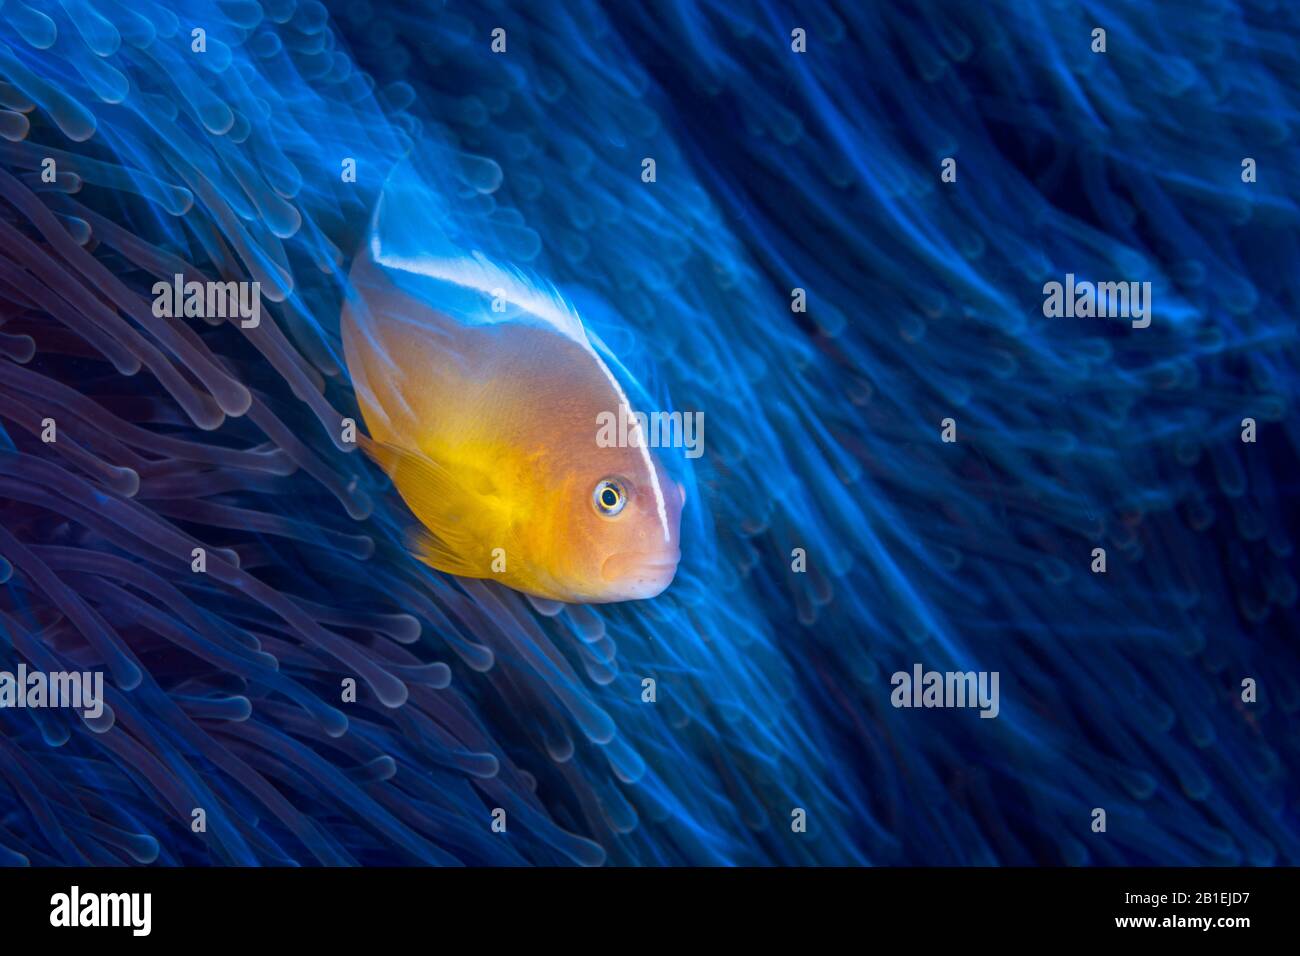 Skunk Clownfish (Amphiprion akallopisos) in its anemone, Mayotte Stock Photo